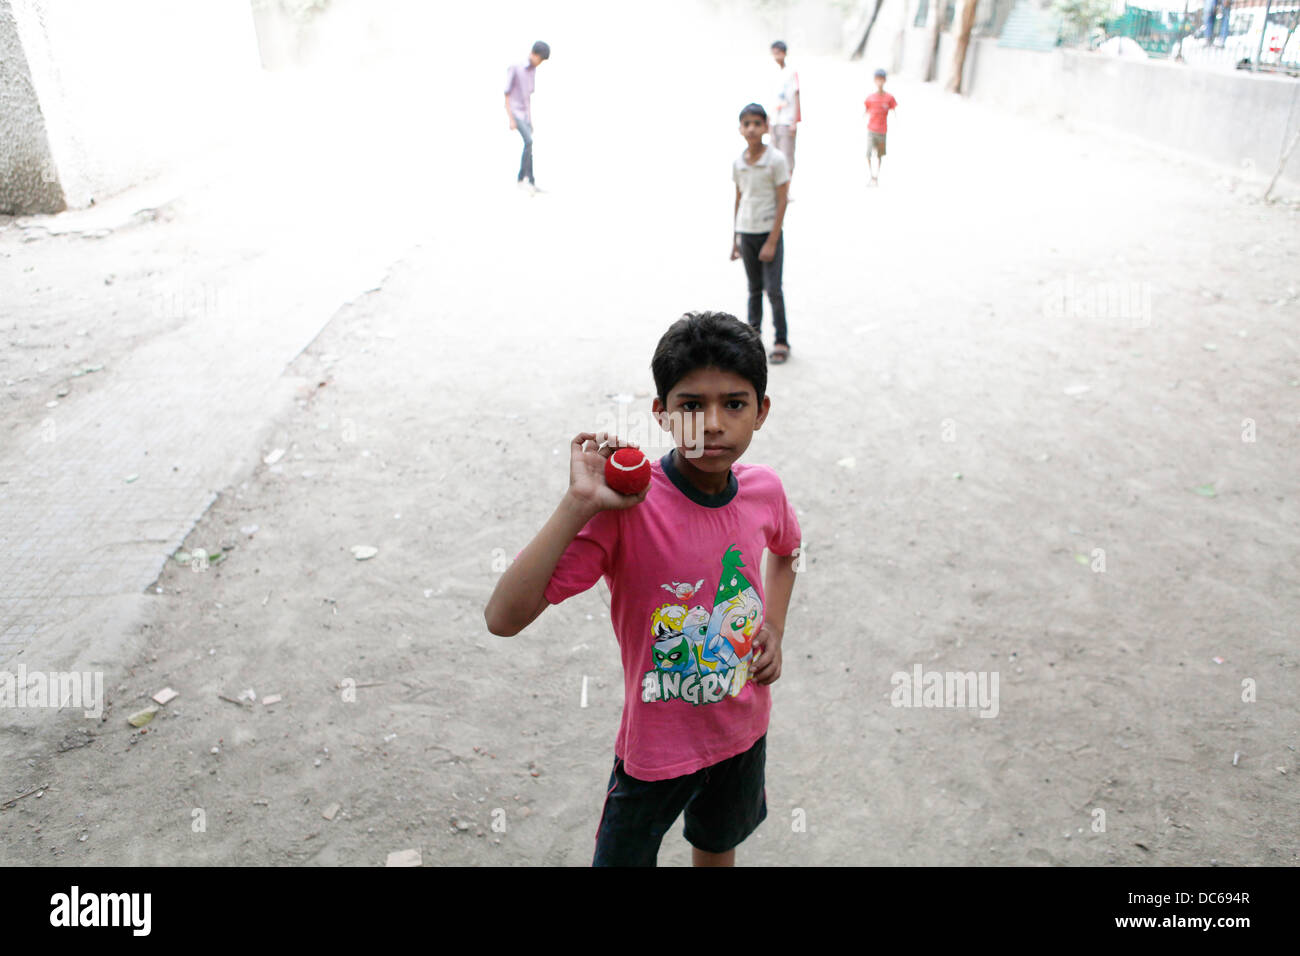 A young Indian boy shows off his cricket ball during a game of street cricket in Delhi. Stock Photo